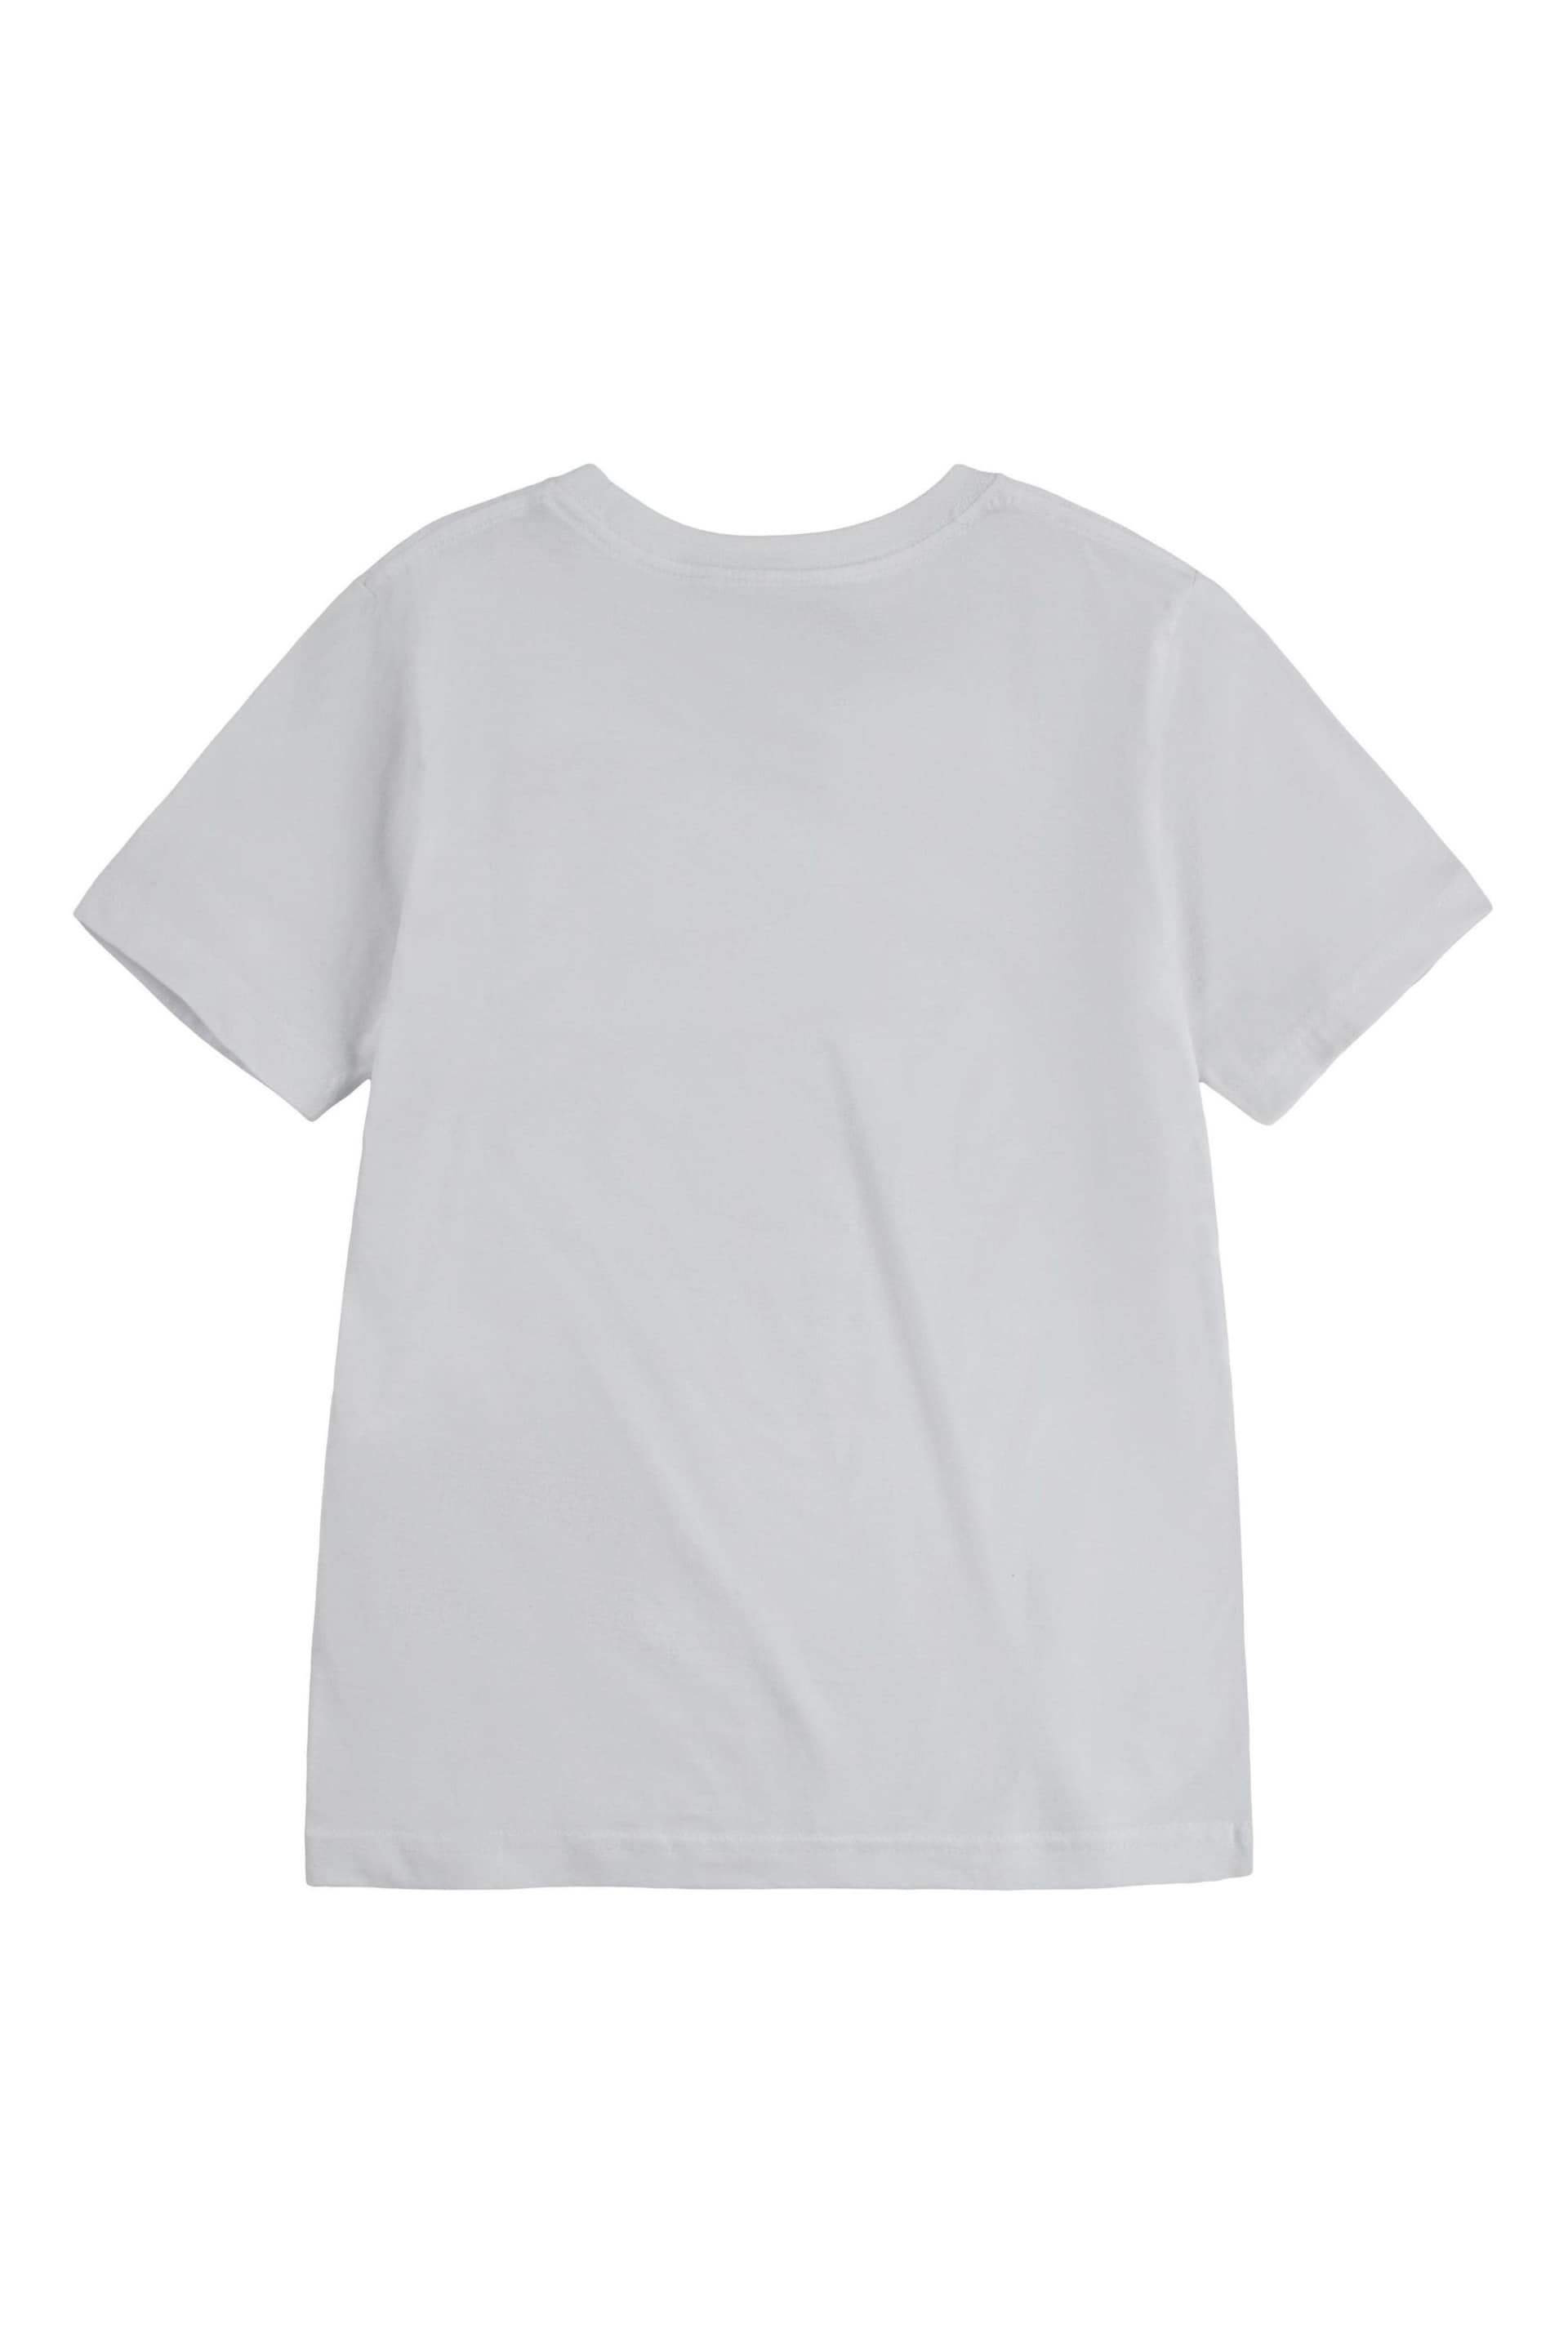 Levi's® White Small Chest Batwing Logo T-Shirt - Image 5 of 5